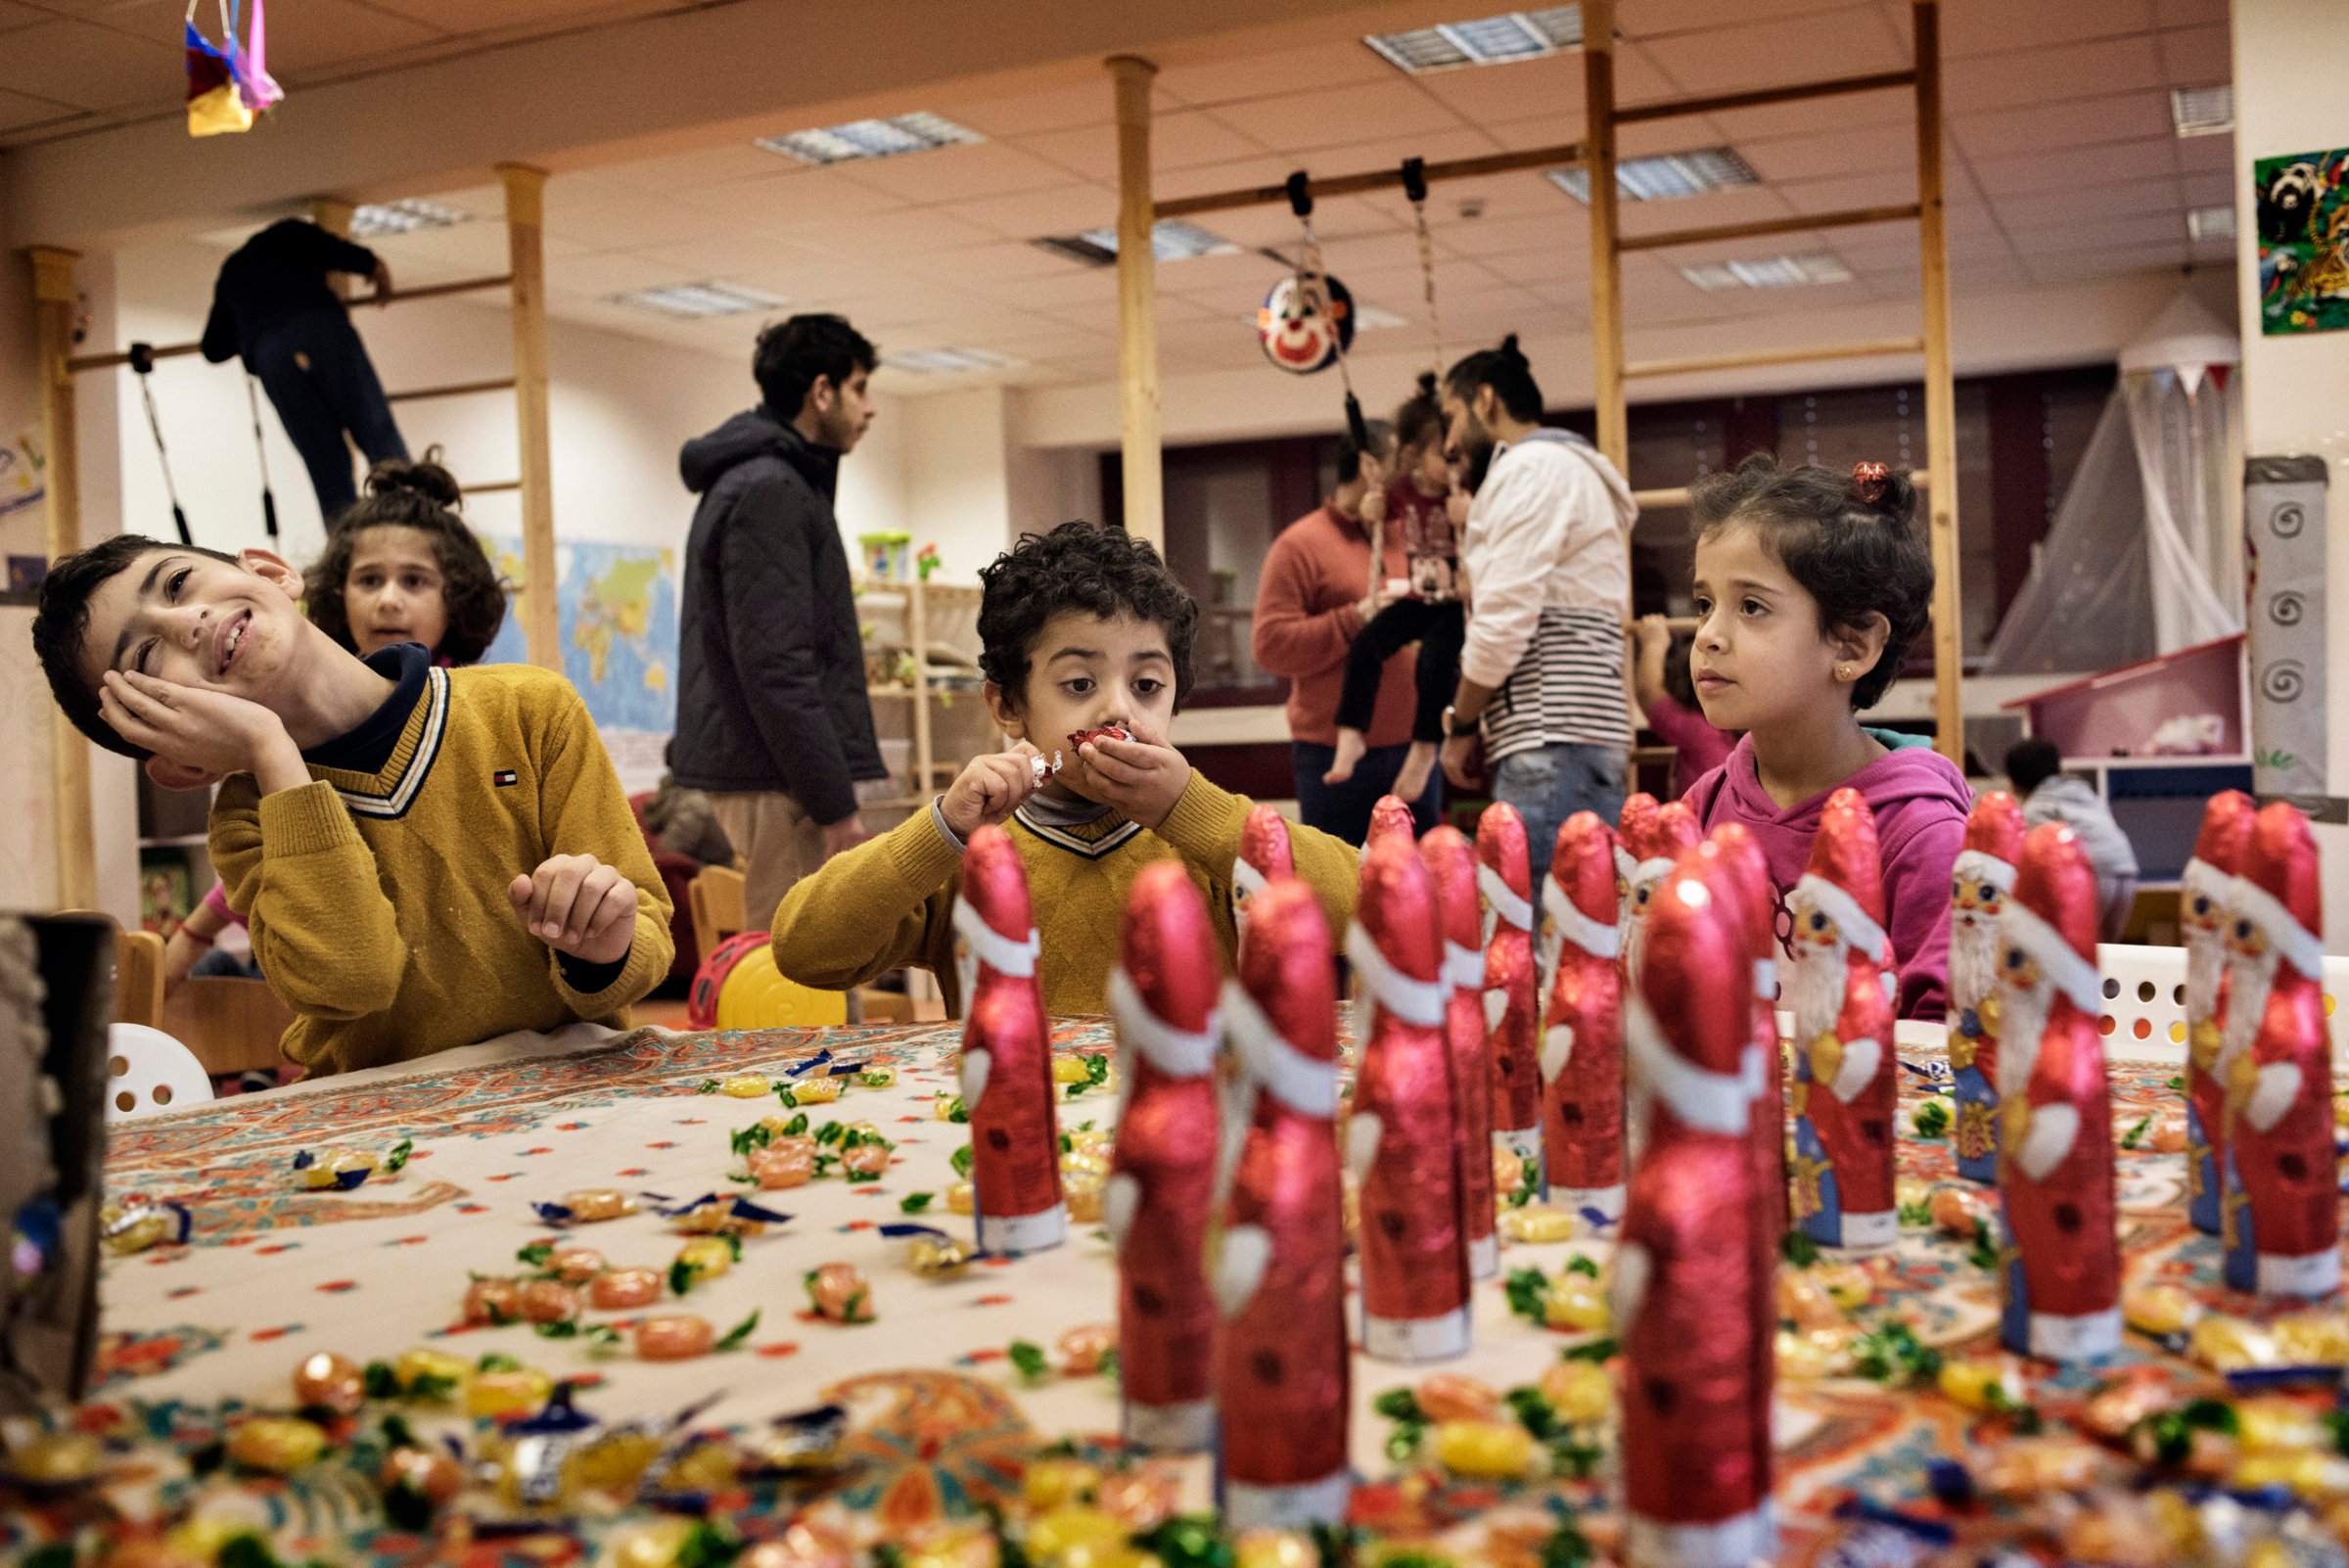 Children of refugees and asylum seekers at the kindergarden of the emergency shelter at a former administrative building in the district of Marzahn, one of many shelters in Berlin run by People's Solidarity. Berlin, Germany, Dec. 2015.